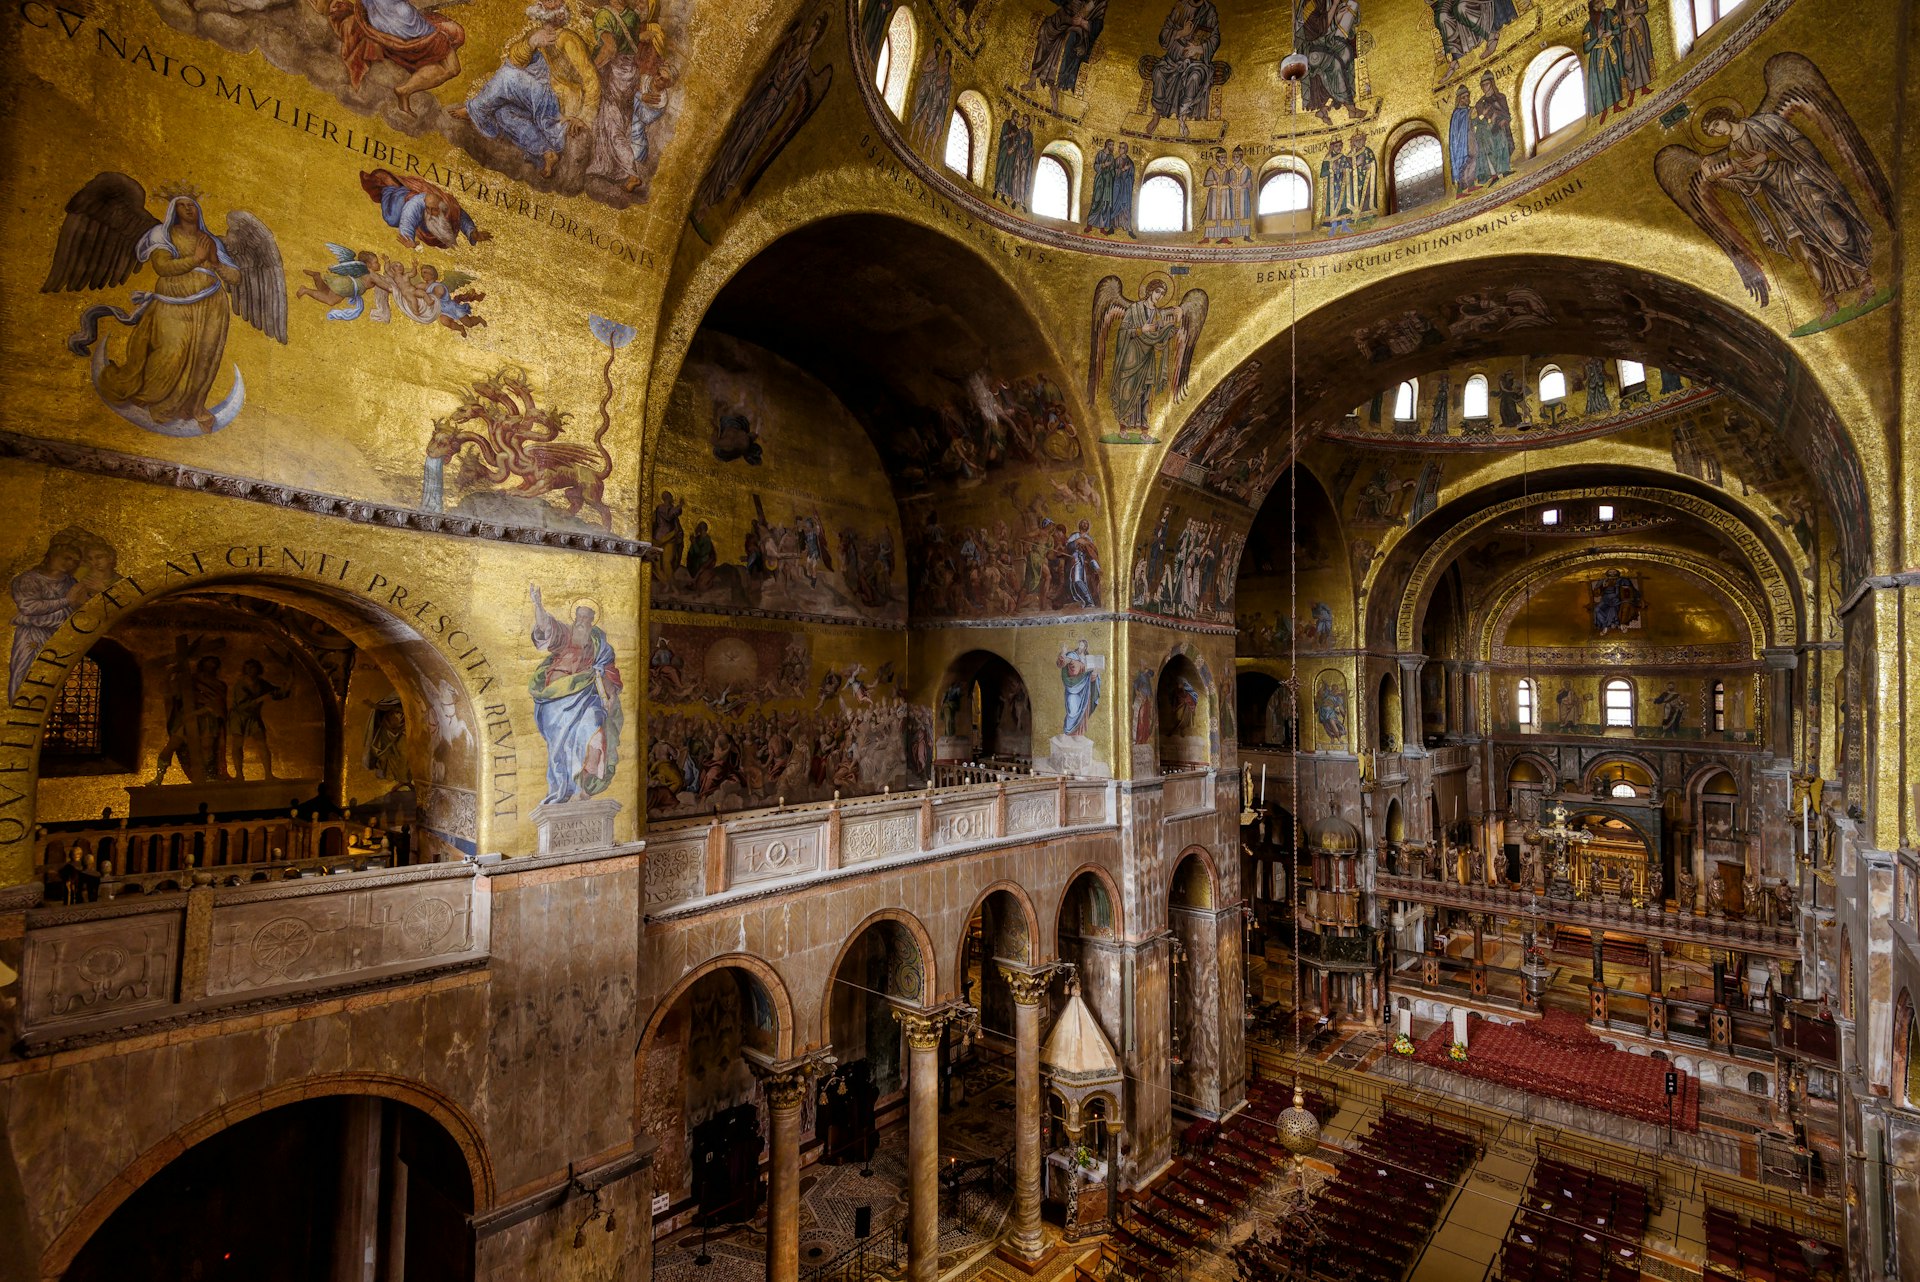 Luxury interior of St Mark`s Basilica (San Marco) in Venice. It is one of the main tourist attractions of Venice.